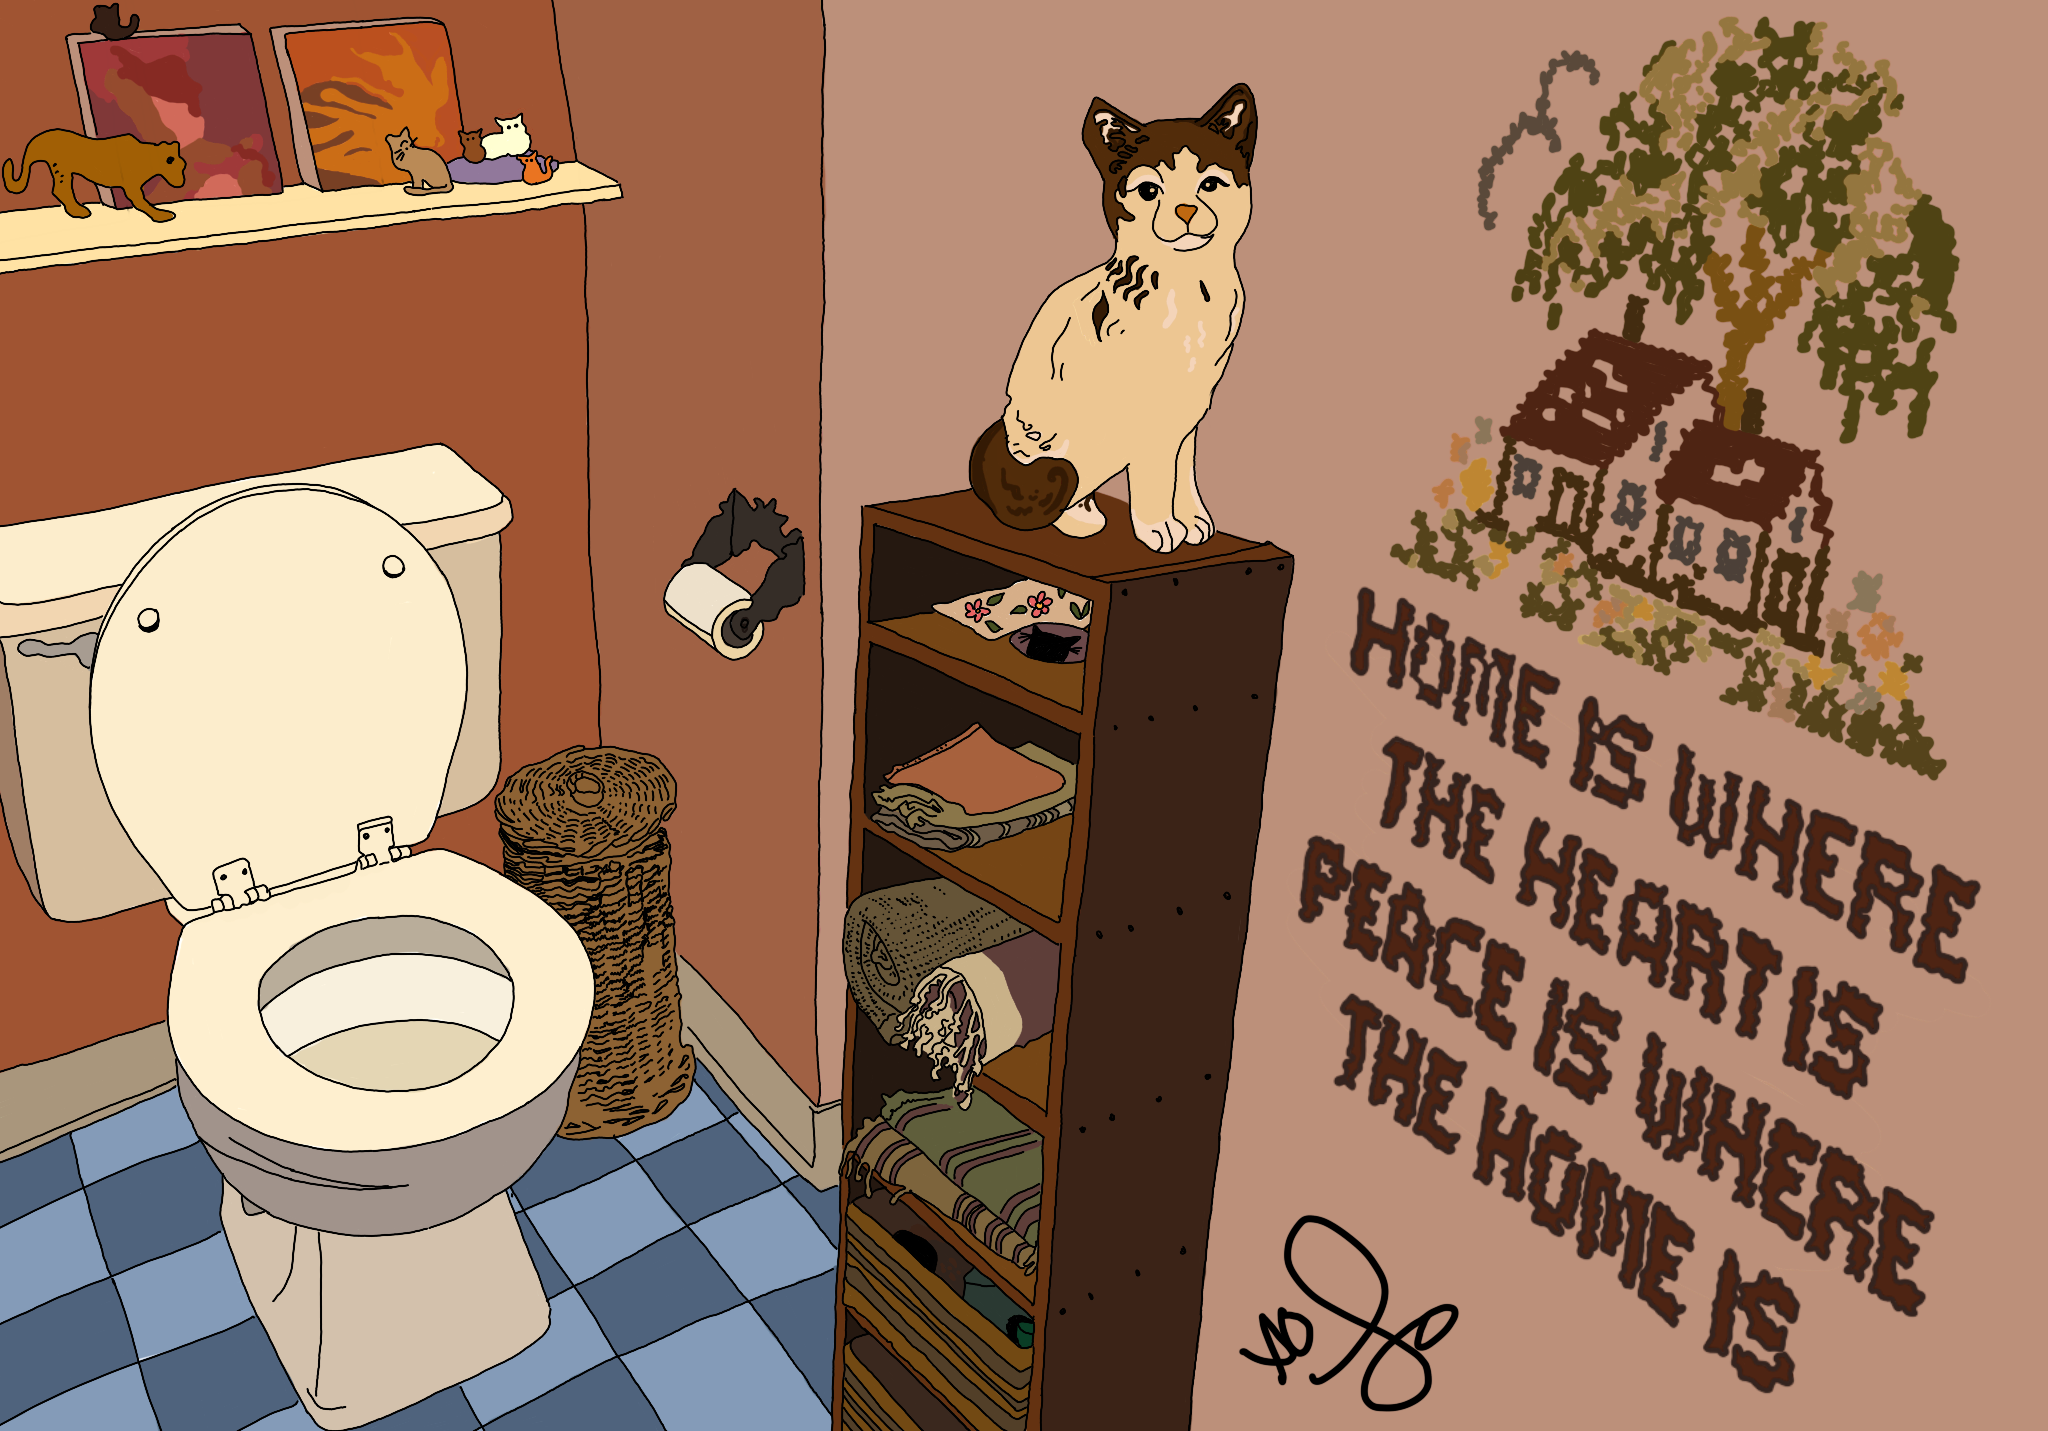 bathroom with "home is where the heart is peace is where the hope is"